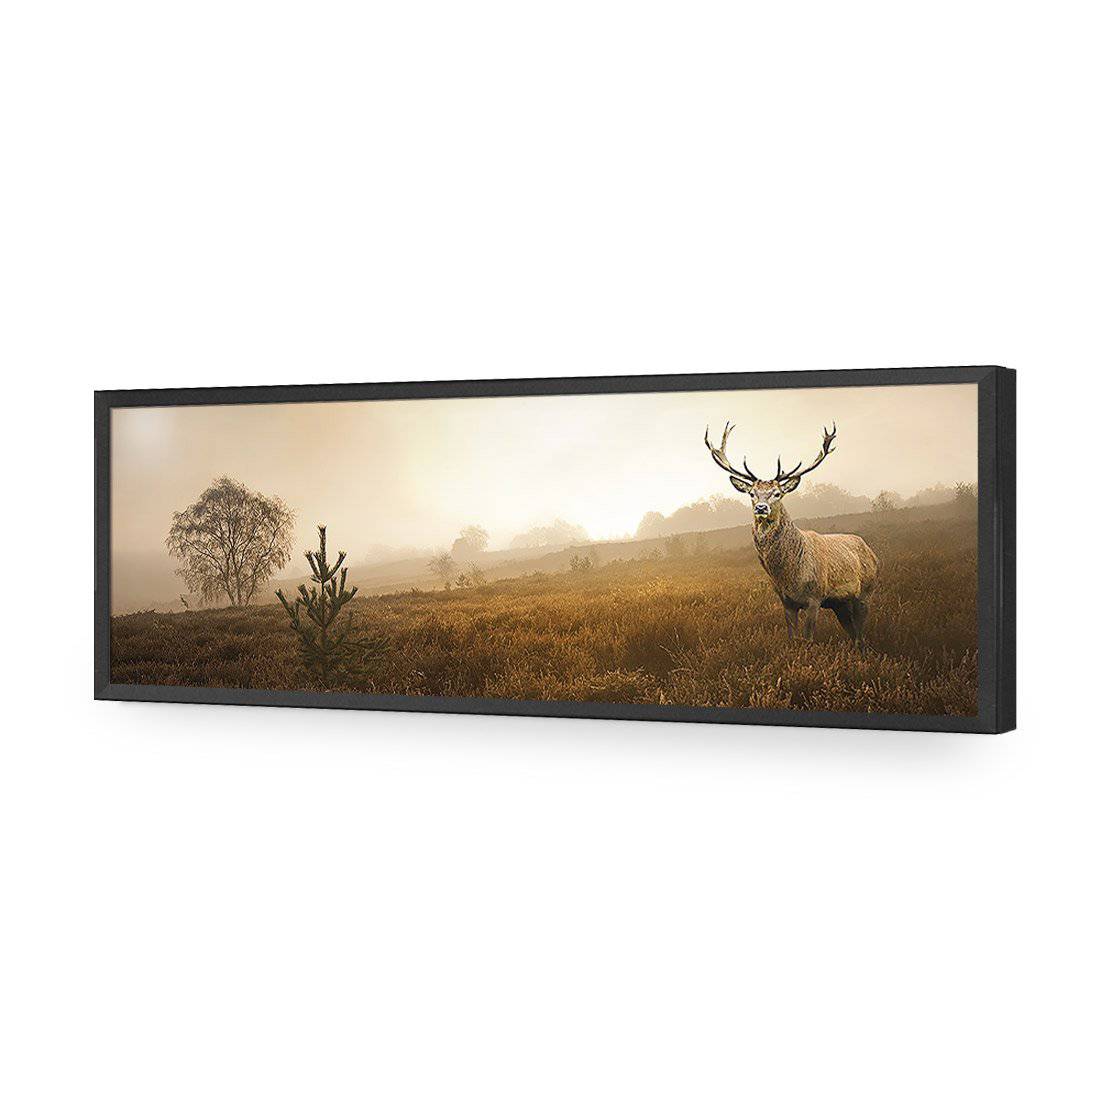 Morning Stag, Long-Acrylic-Wall Art Design-Without Border-Acrylic - Black Frame-60x20cm-Wall Art Designs